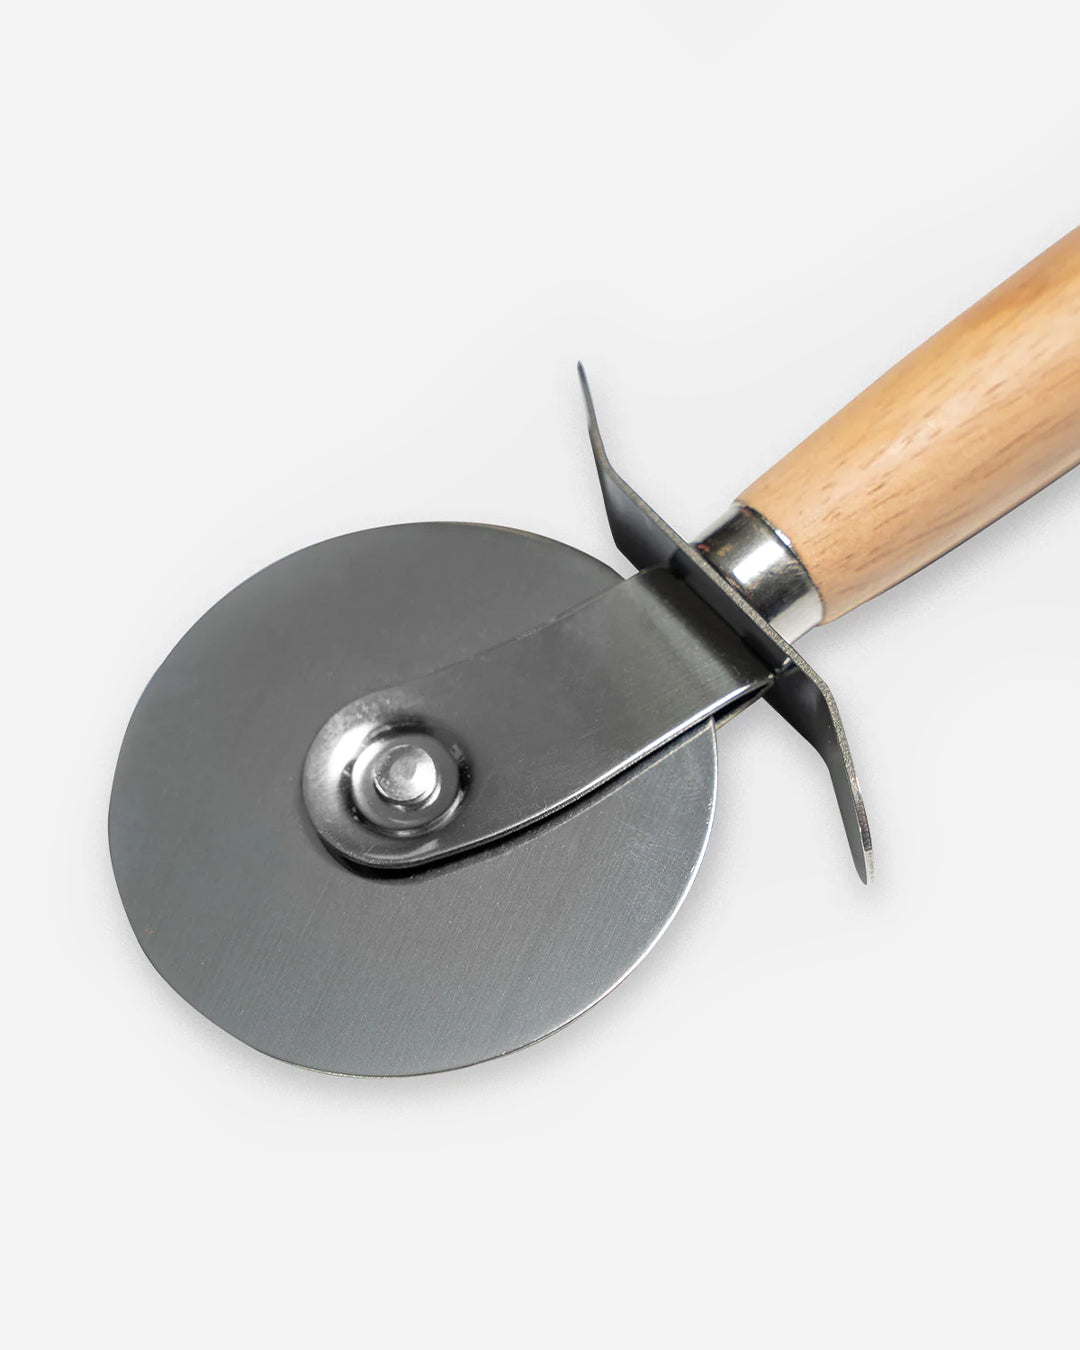 PHIL'S PIZZA CUTTER